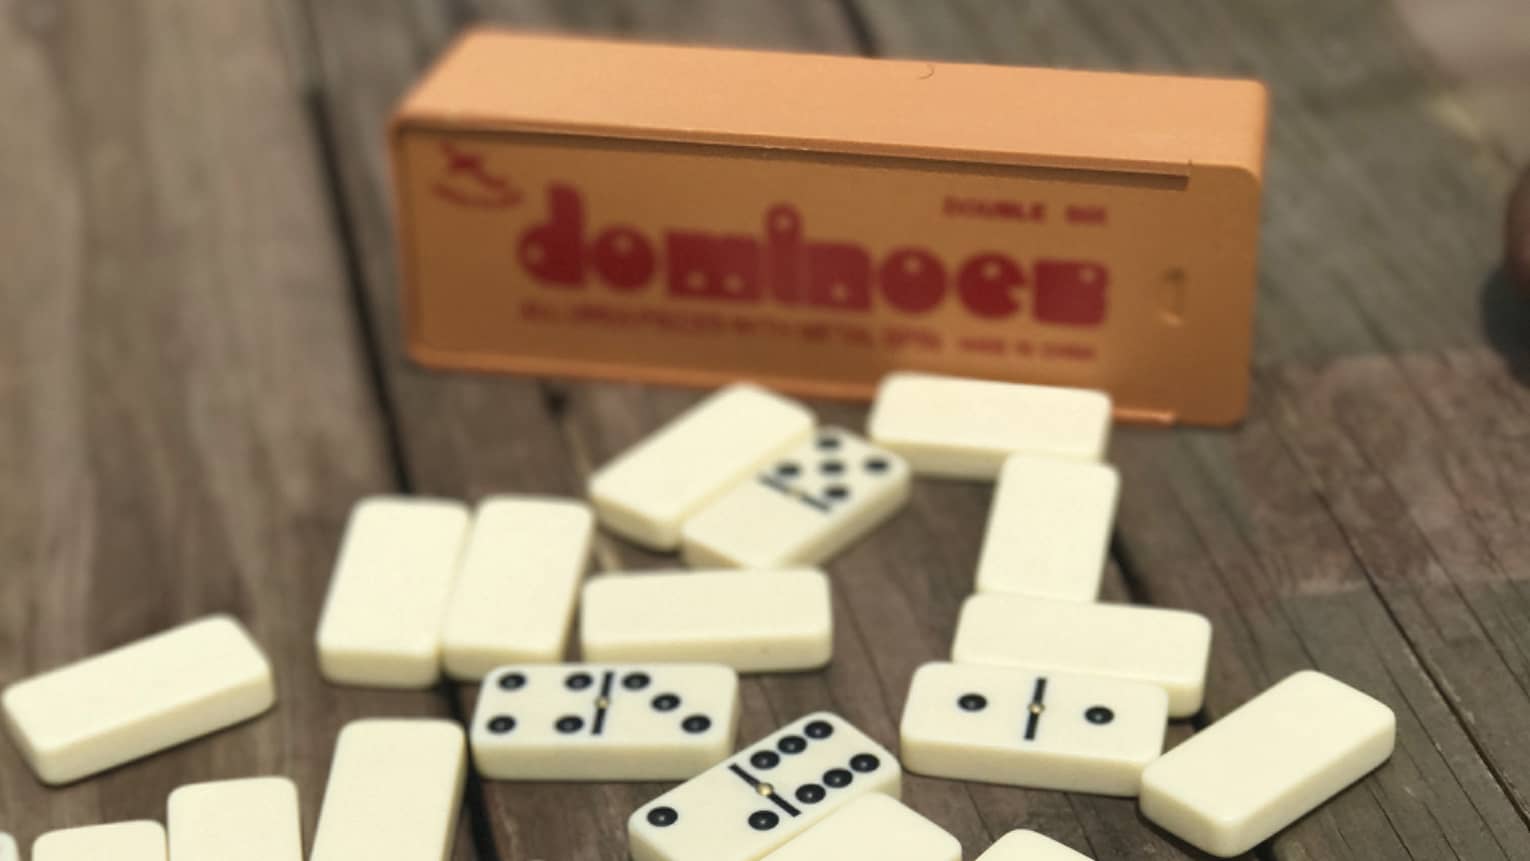 Dominoes on table, box in background